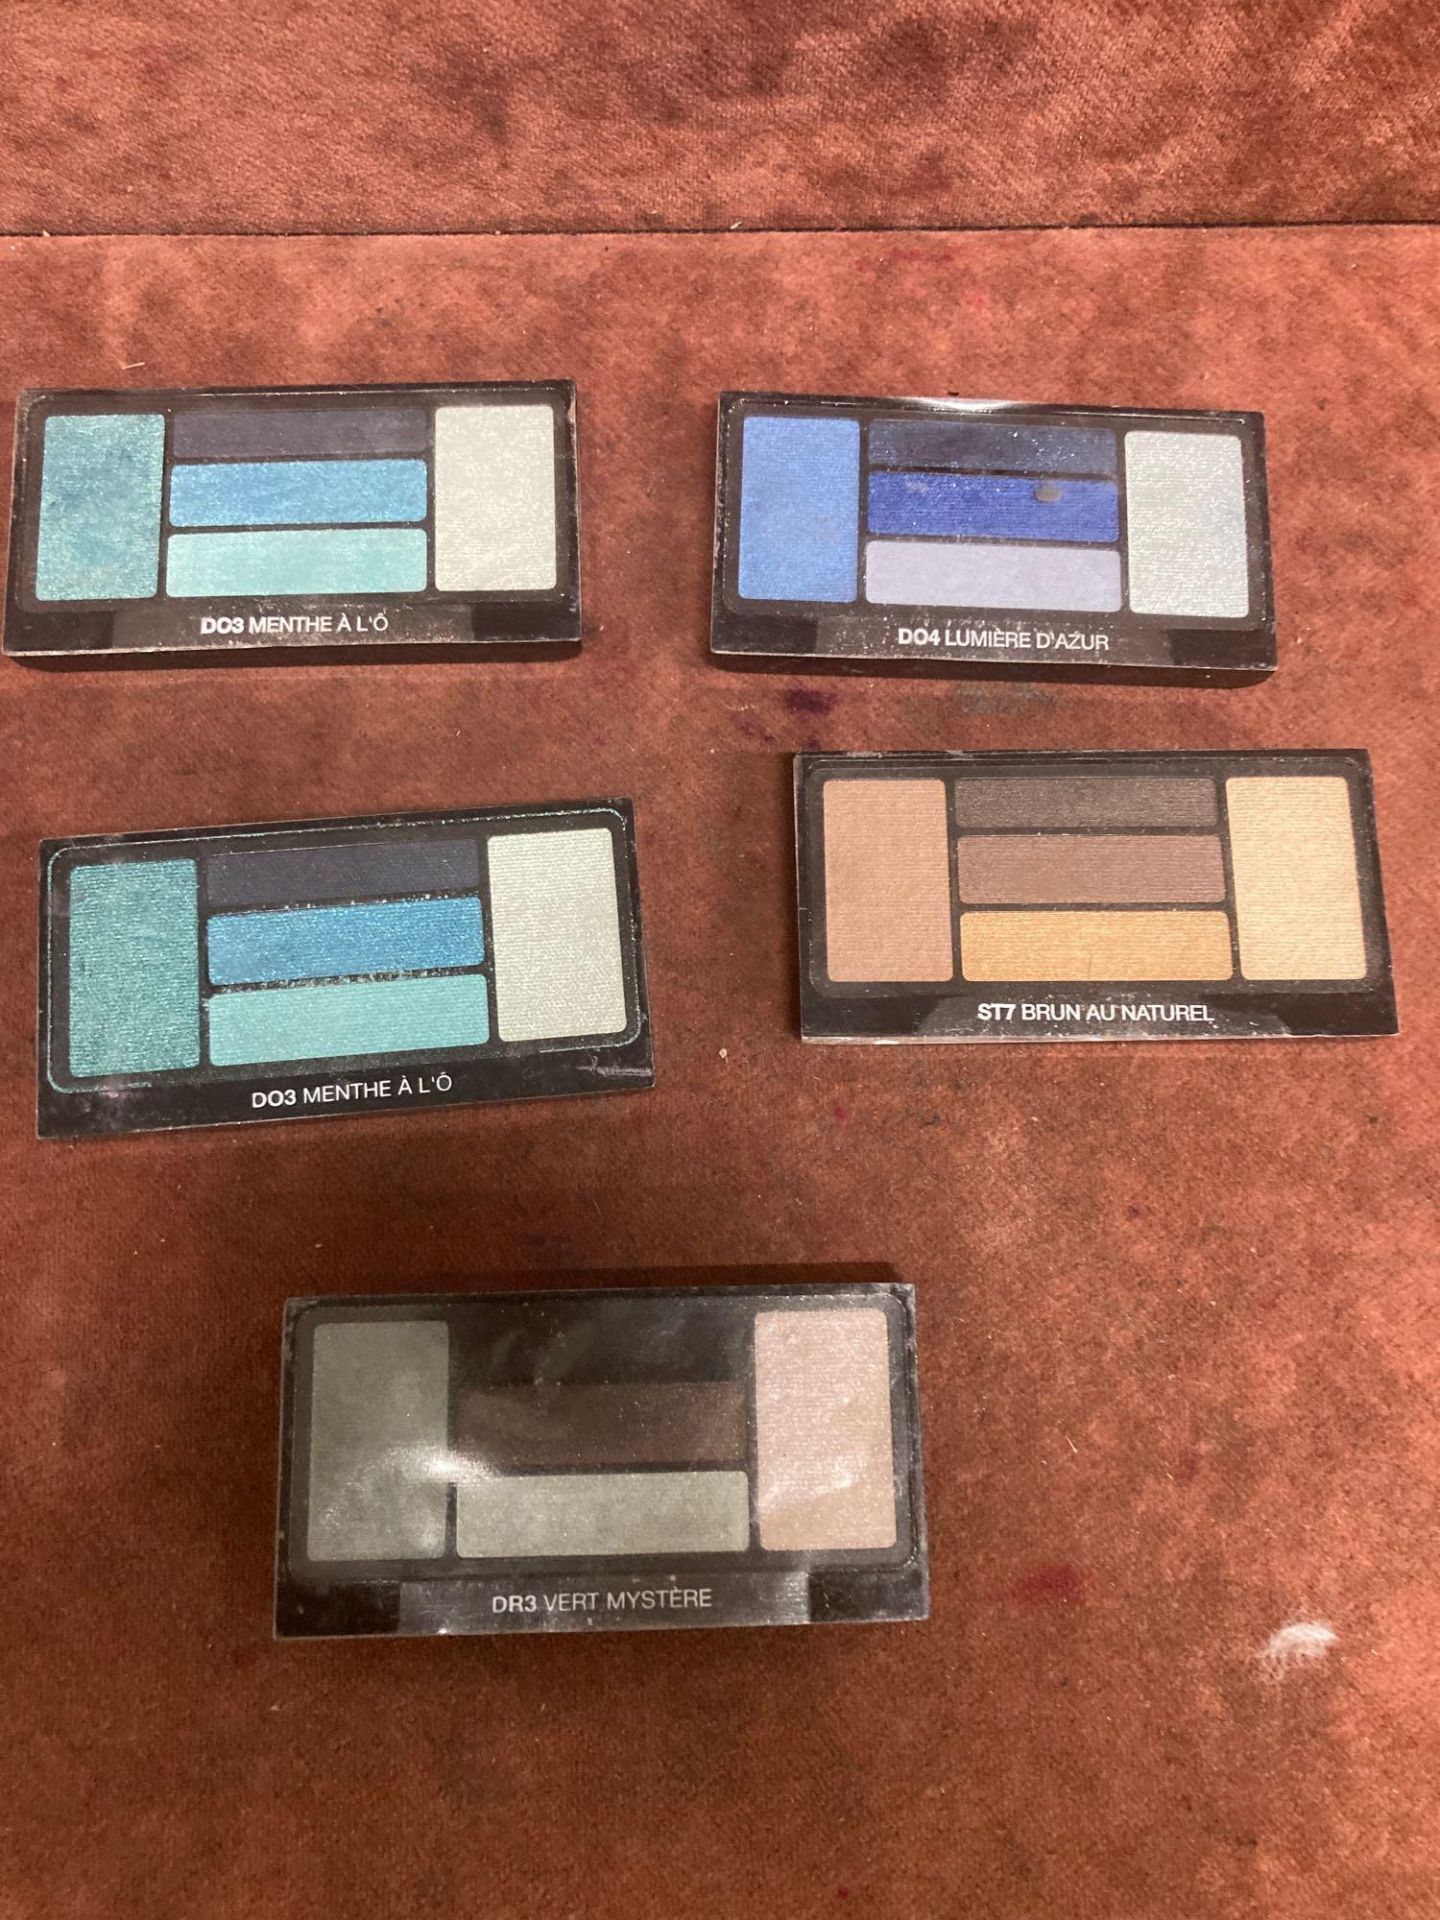 (Jb) RRP £225 Lot To Contain 5 Testers Of Lancome 5 Colour Eyeshadow Palettes All Ex-Display And Ass